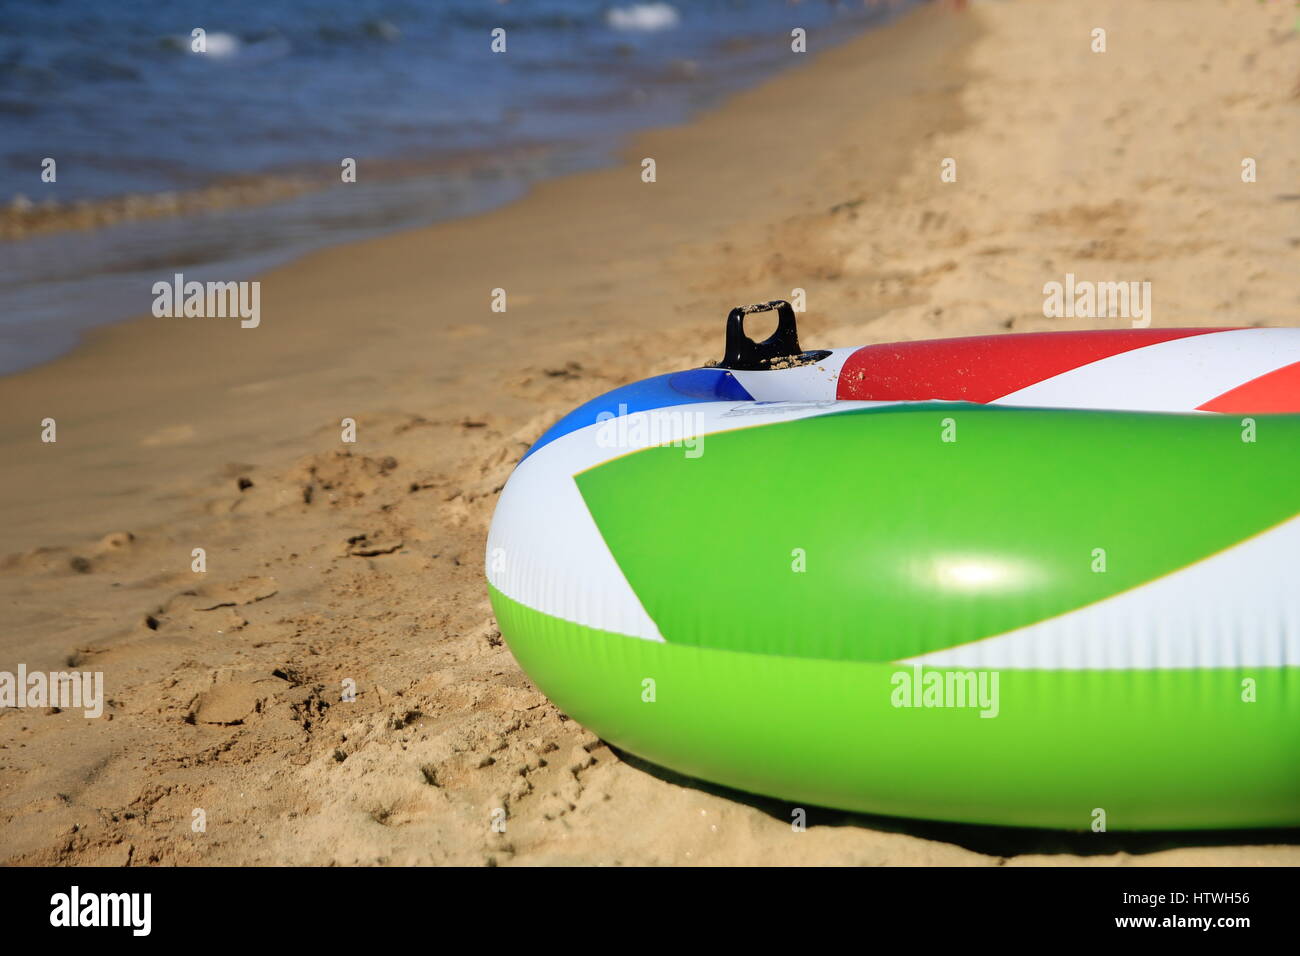 Colorful inflatable ring on a beautiful sandy beach in the summer sunshine, green, red, white, blue. Stock Photo